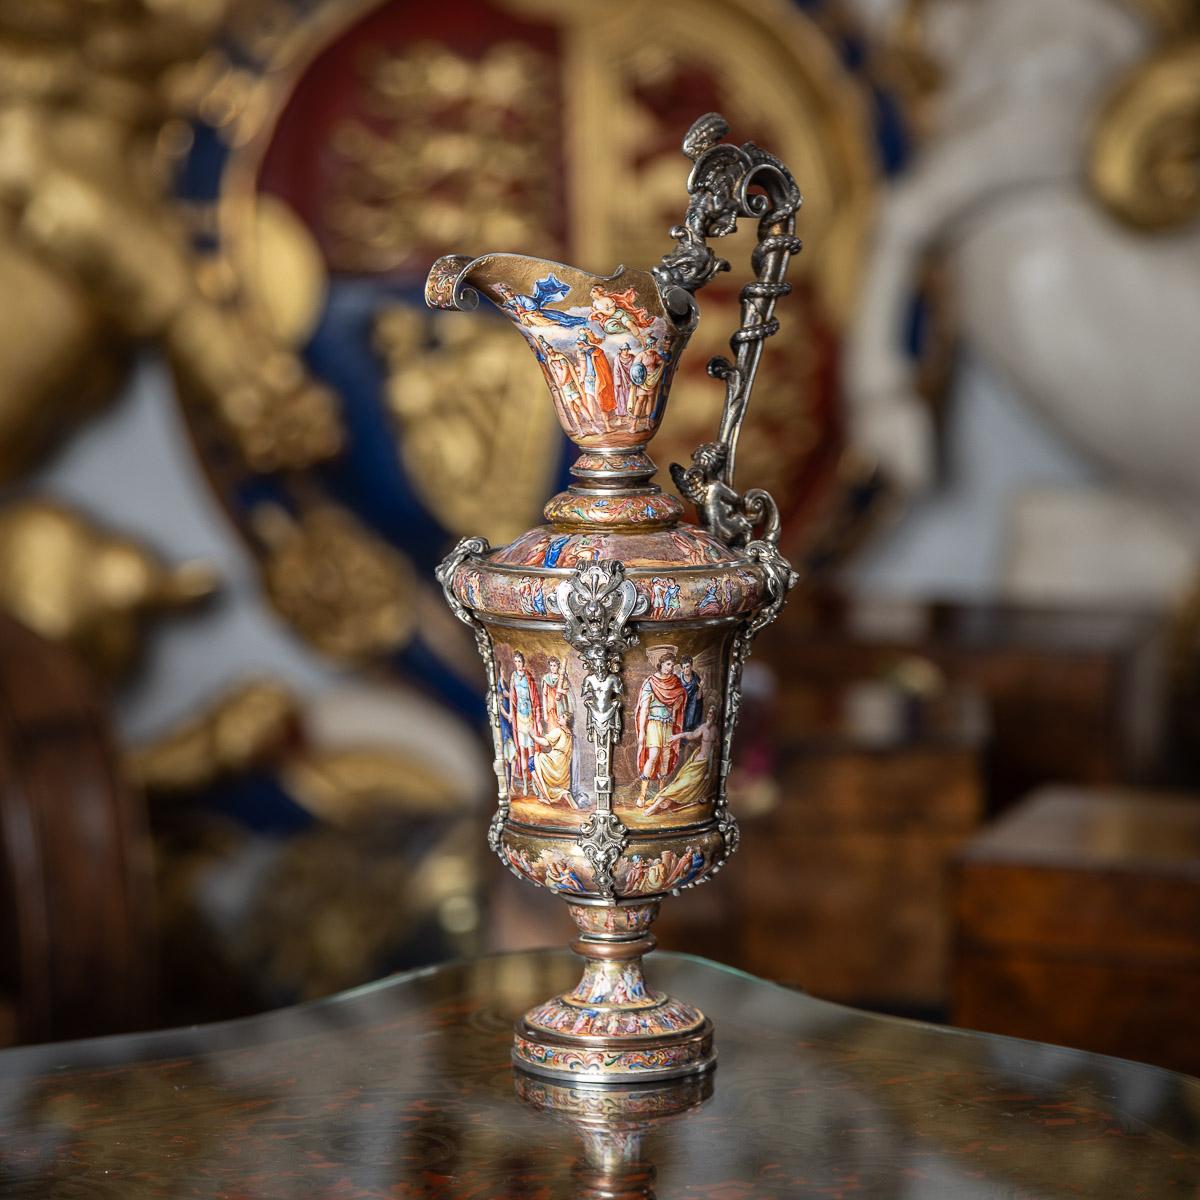 Antique late-19th Century Austrian exceptional solid silver & enamel ewer, standing on a raised round base, urn shaped, elaborate scrolled spout and the body hand painted throughout with classical allegorical scenes, applied with cast decorative